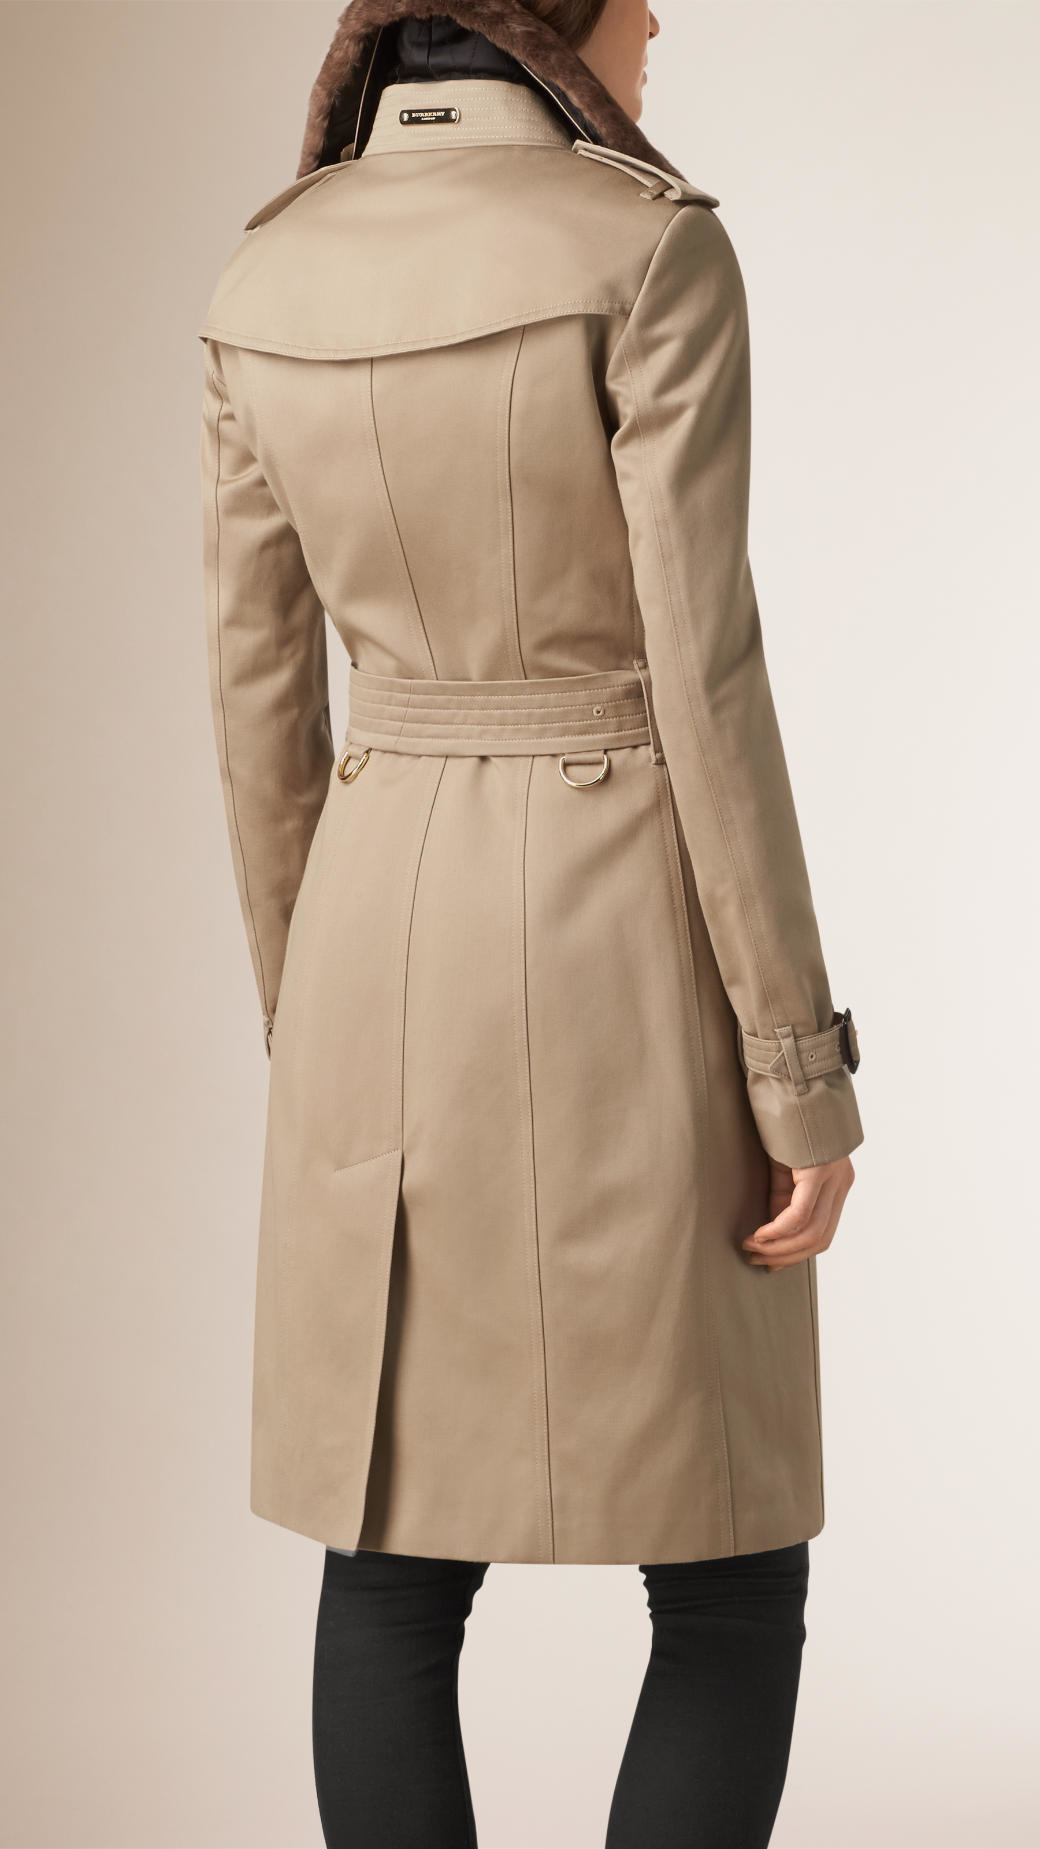 Burberry Fur Collar Cotton Trench Coat in Brown - Lyst